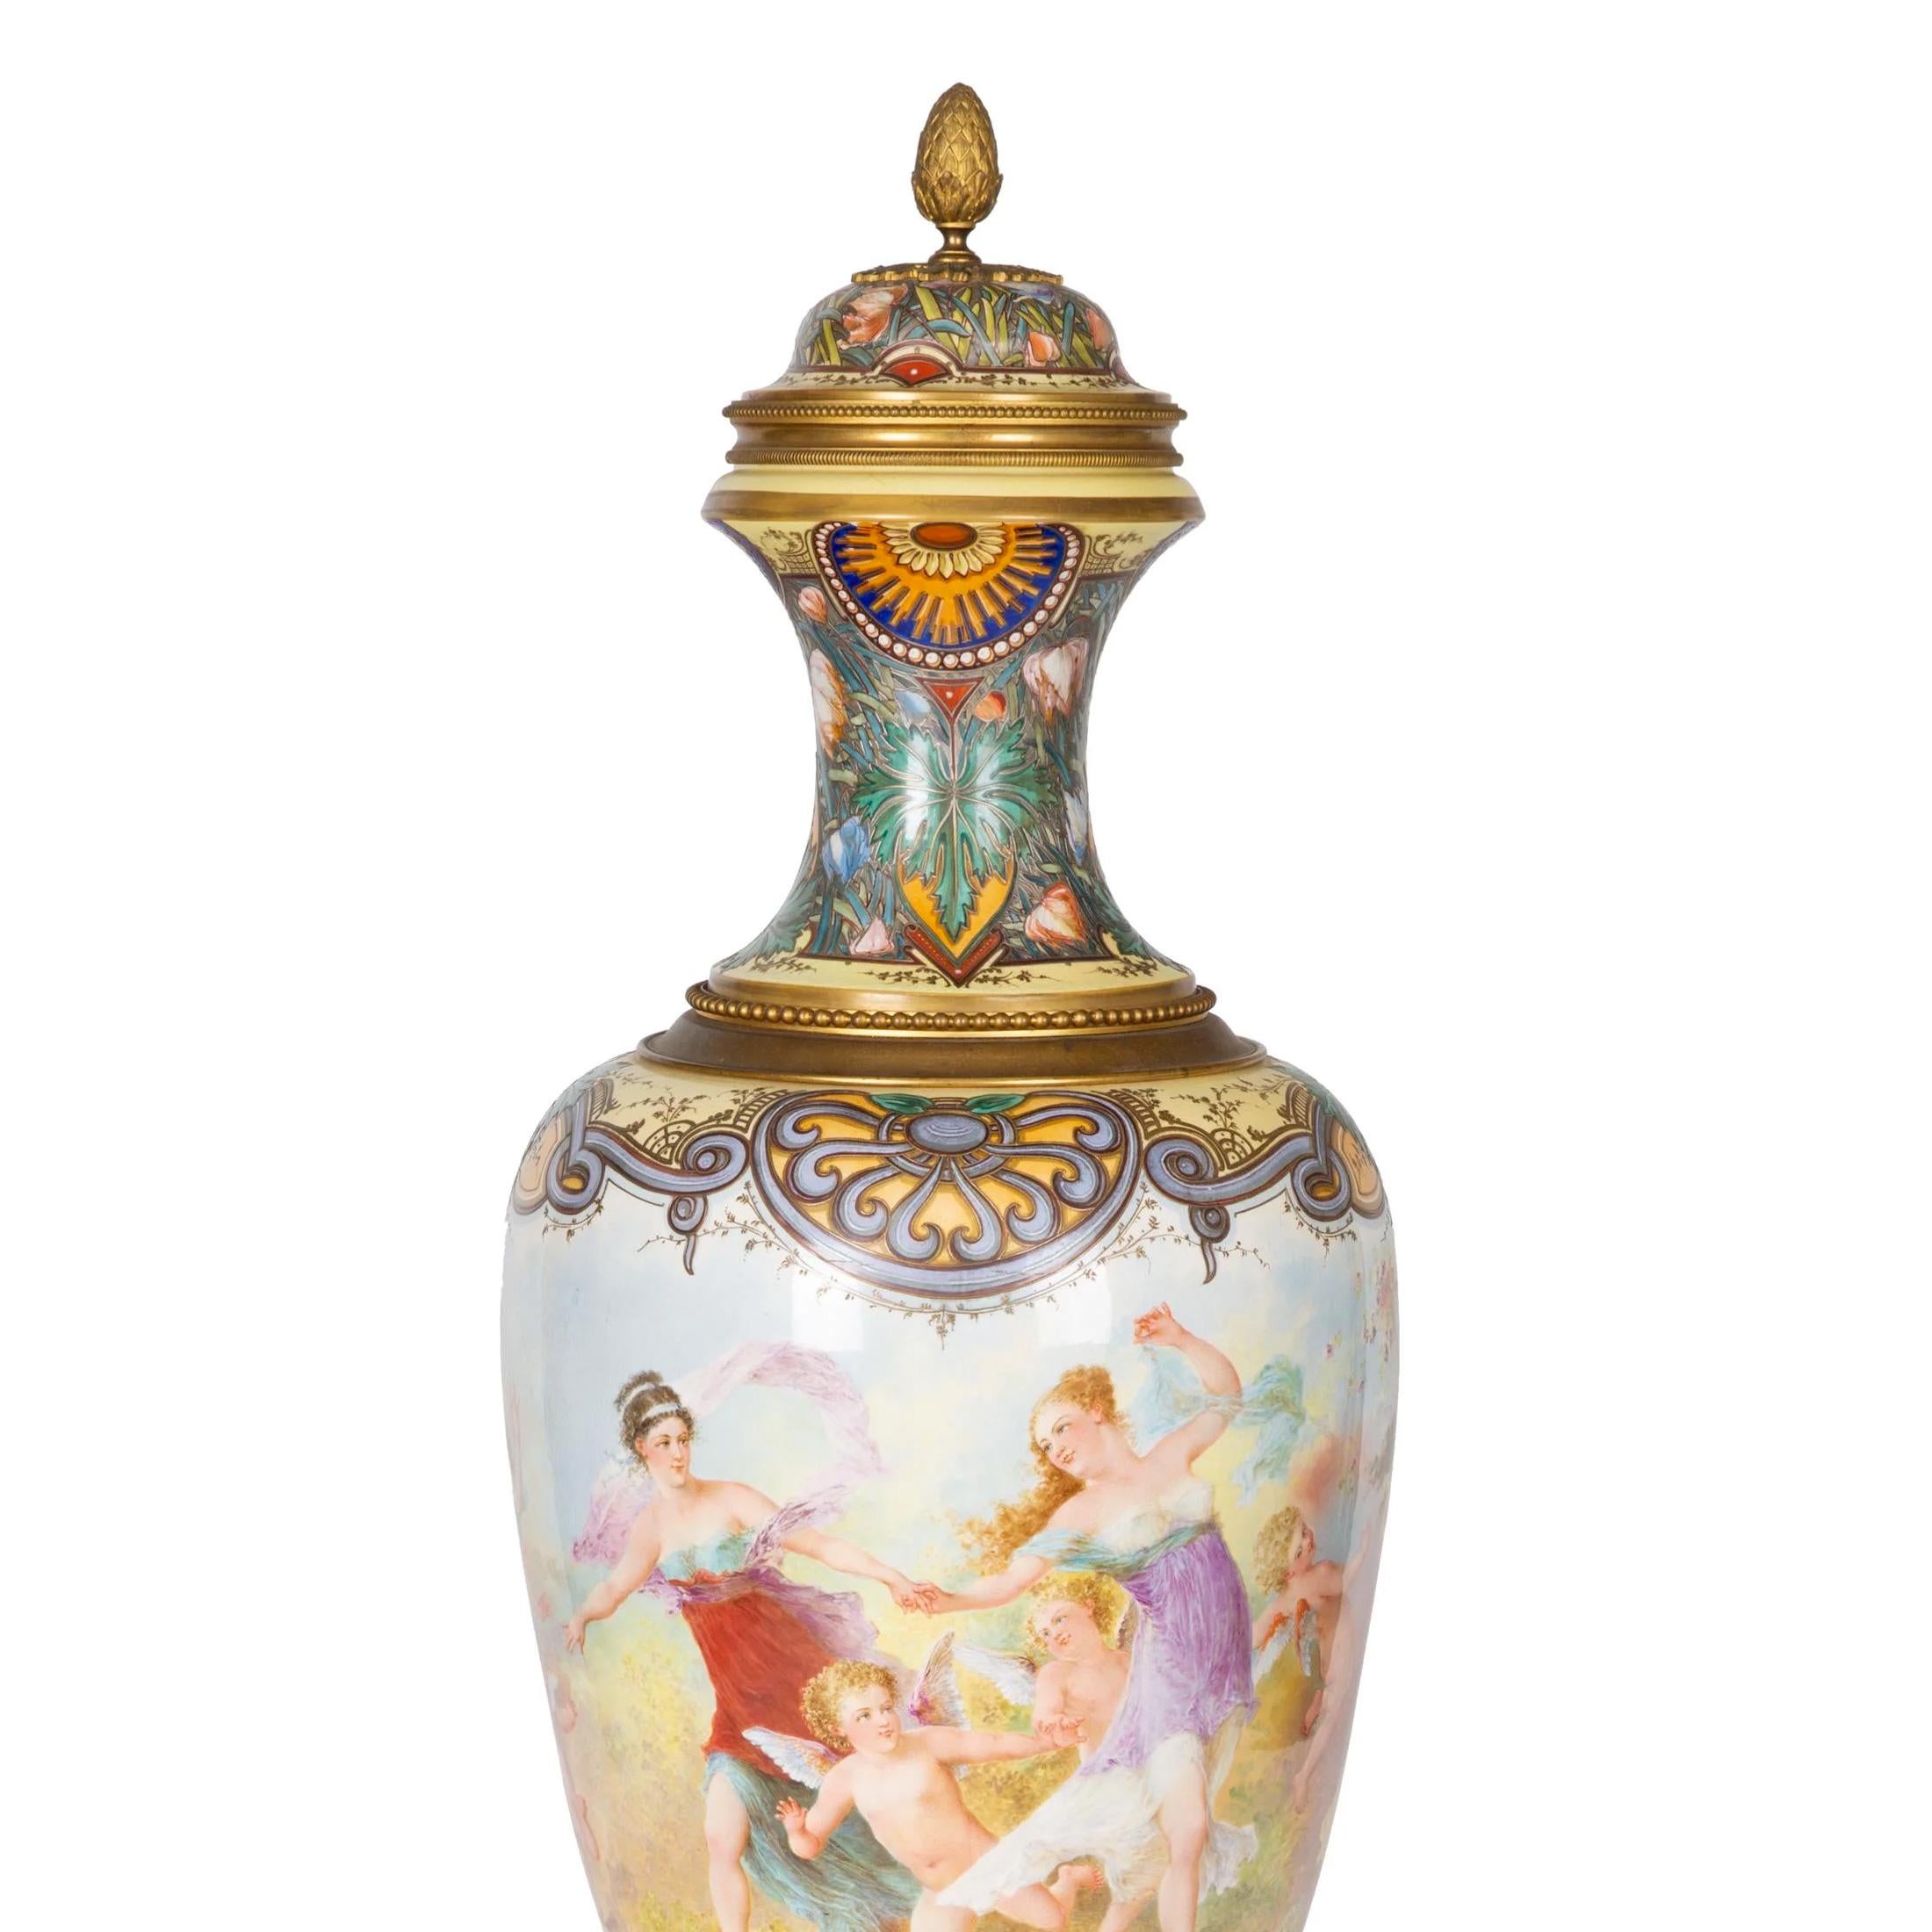  Pair of Monumental Sèvres and Gilt Bronze-Mounted Vase by Fuchs For Sale 10